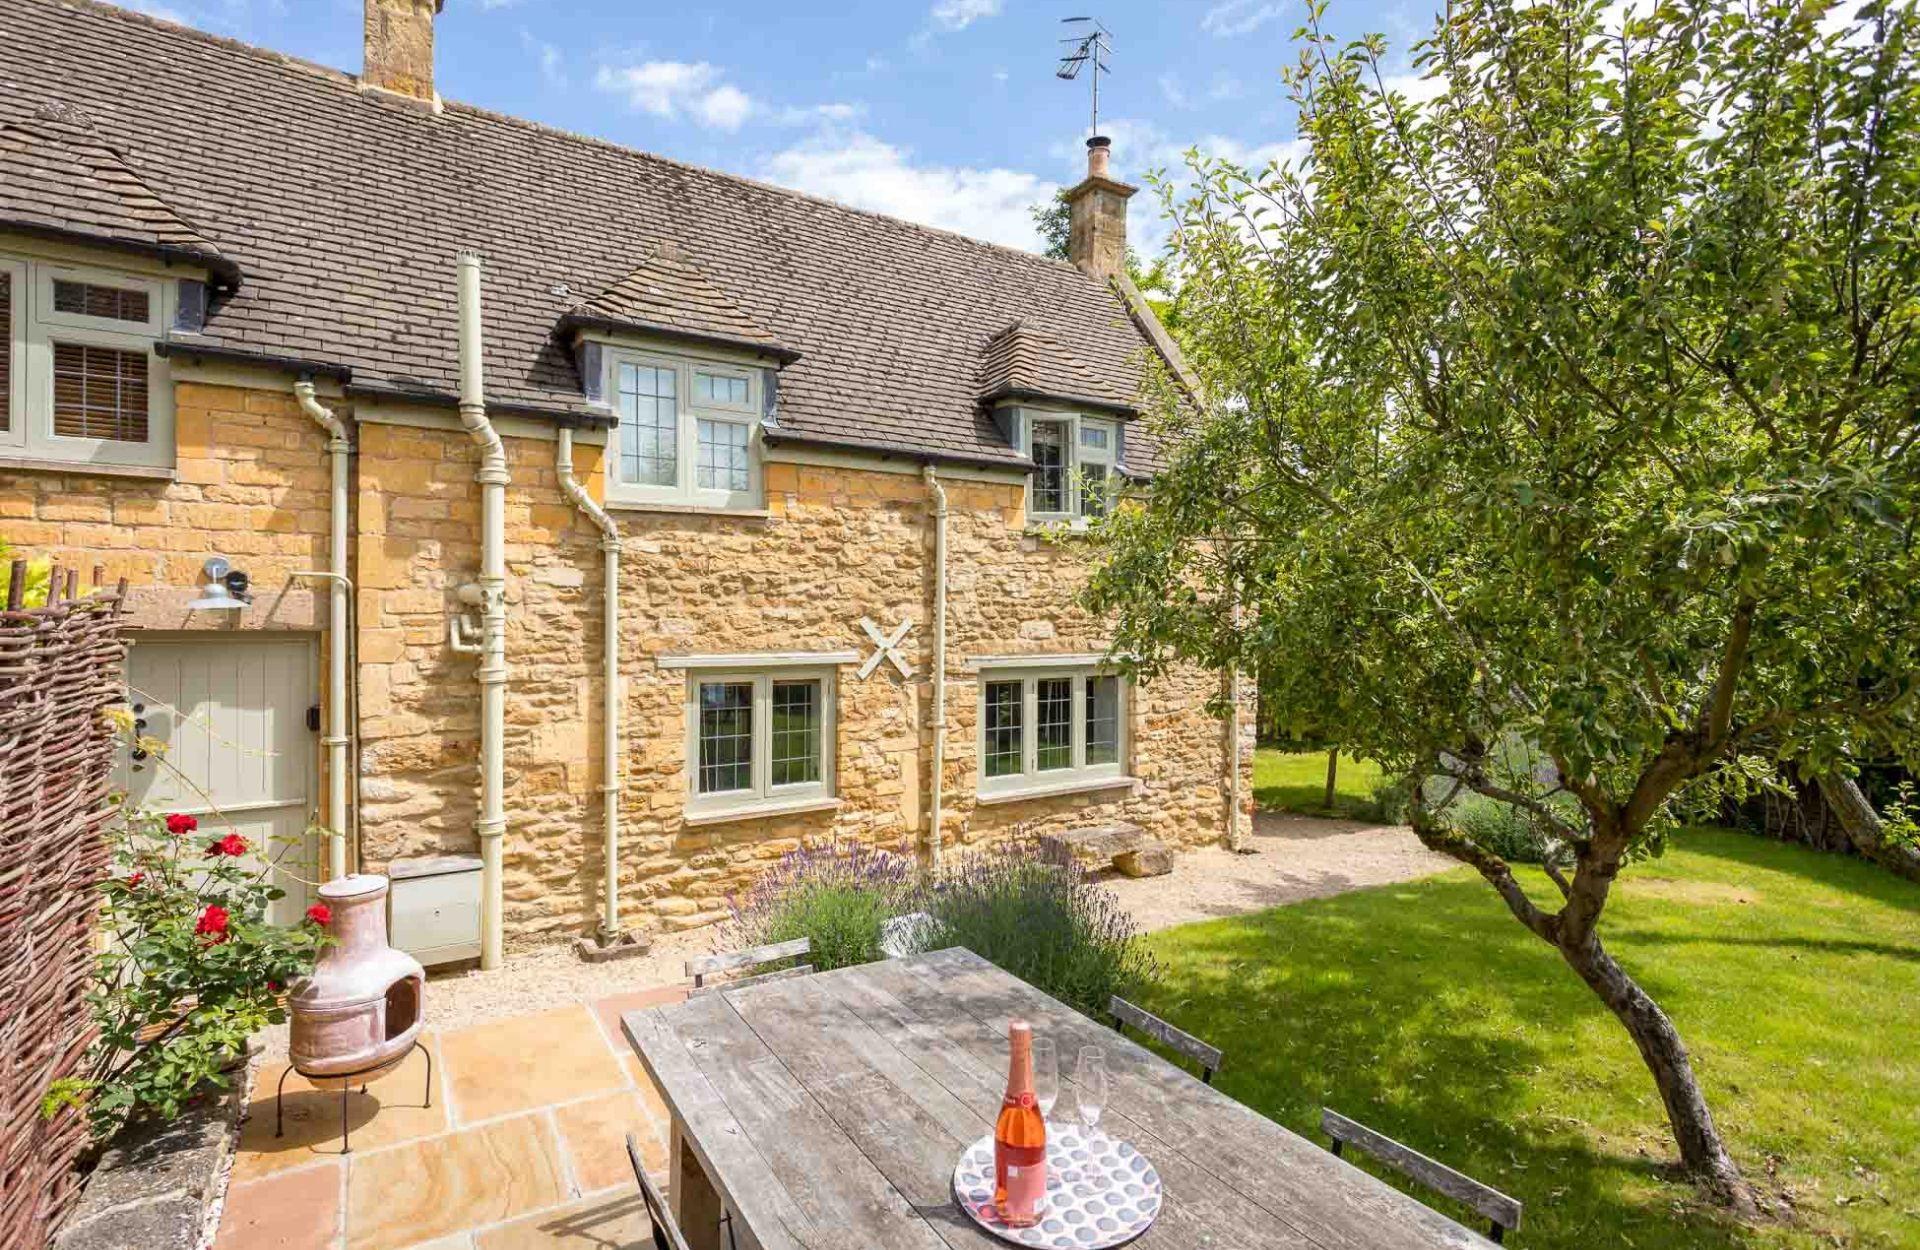 Holiday Cottage Reviews for Wyncliffe - Self Catering Property in Chipping Campden, Gloucestershire